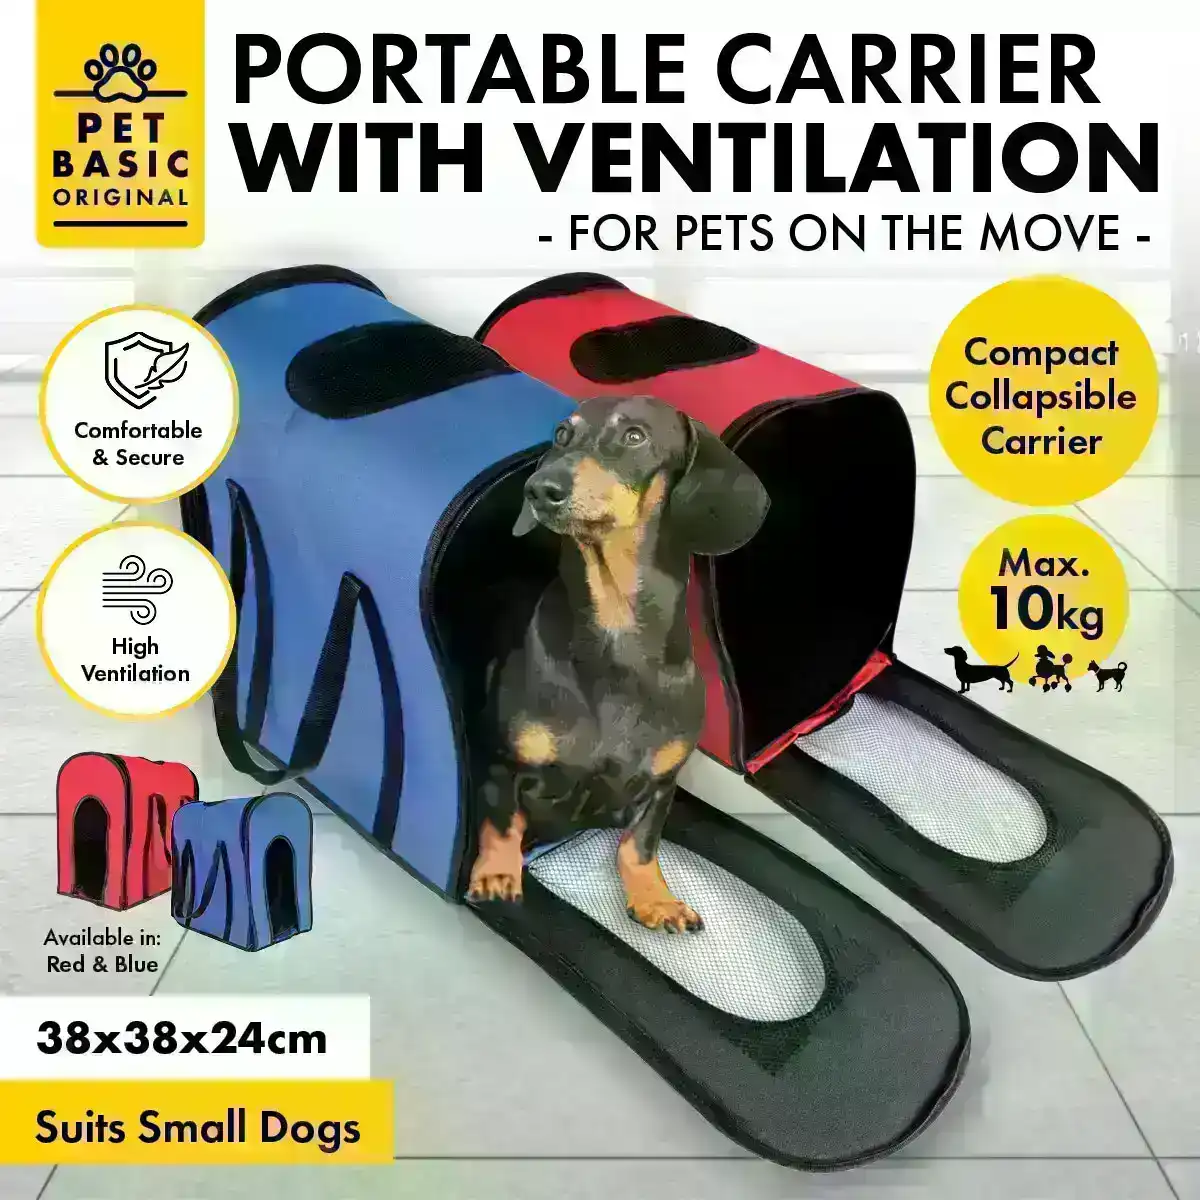 Pet Basic® Portable Dog Carrier Ventilated & Collapsible 10KG Max